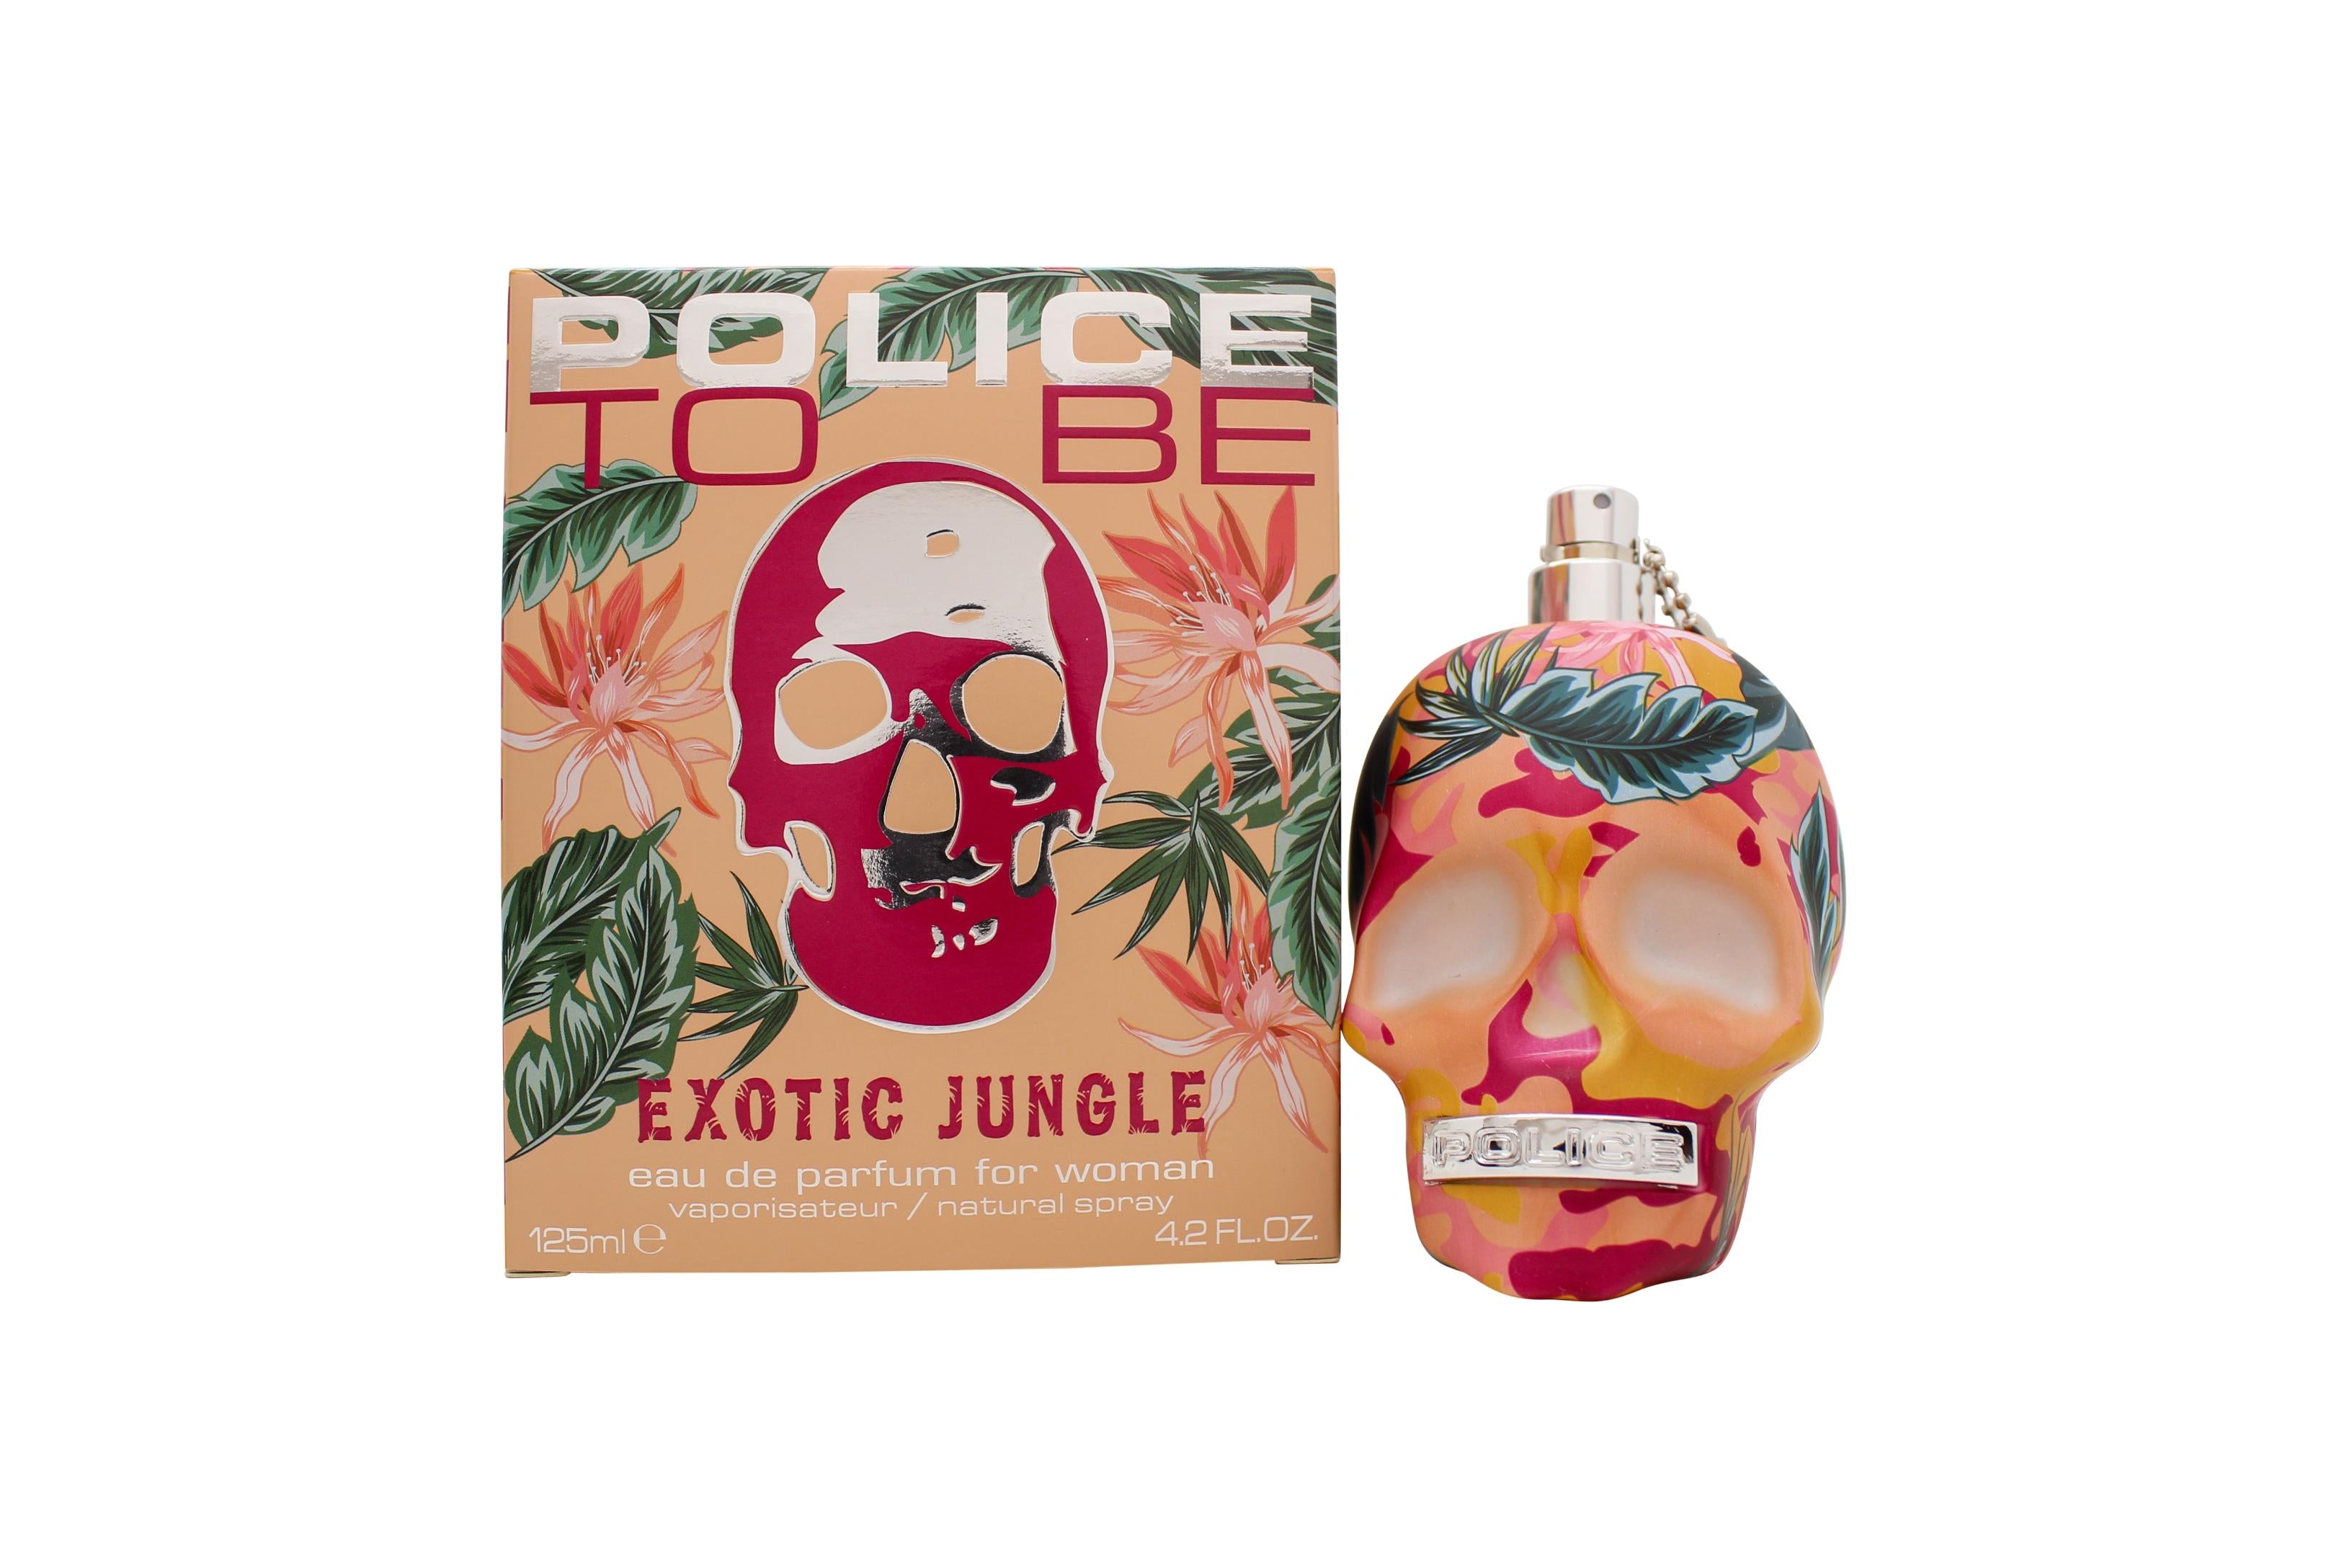 View Police To Be Exotic Jungle For Woman Eau de Parfum 125ml Spray information